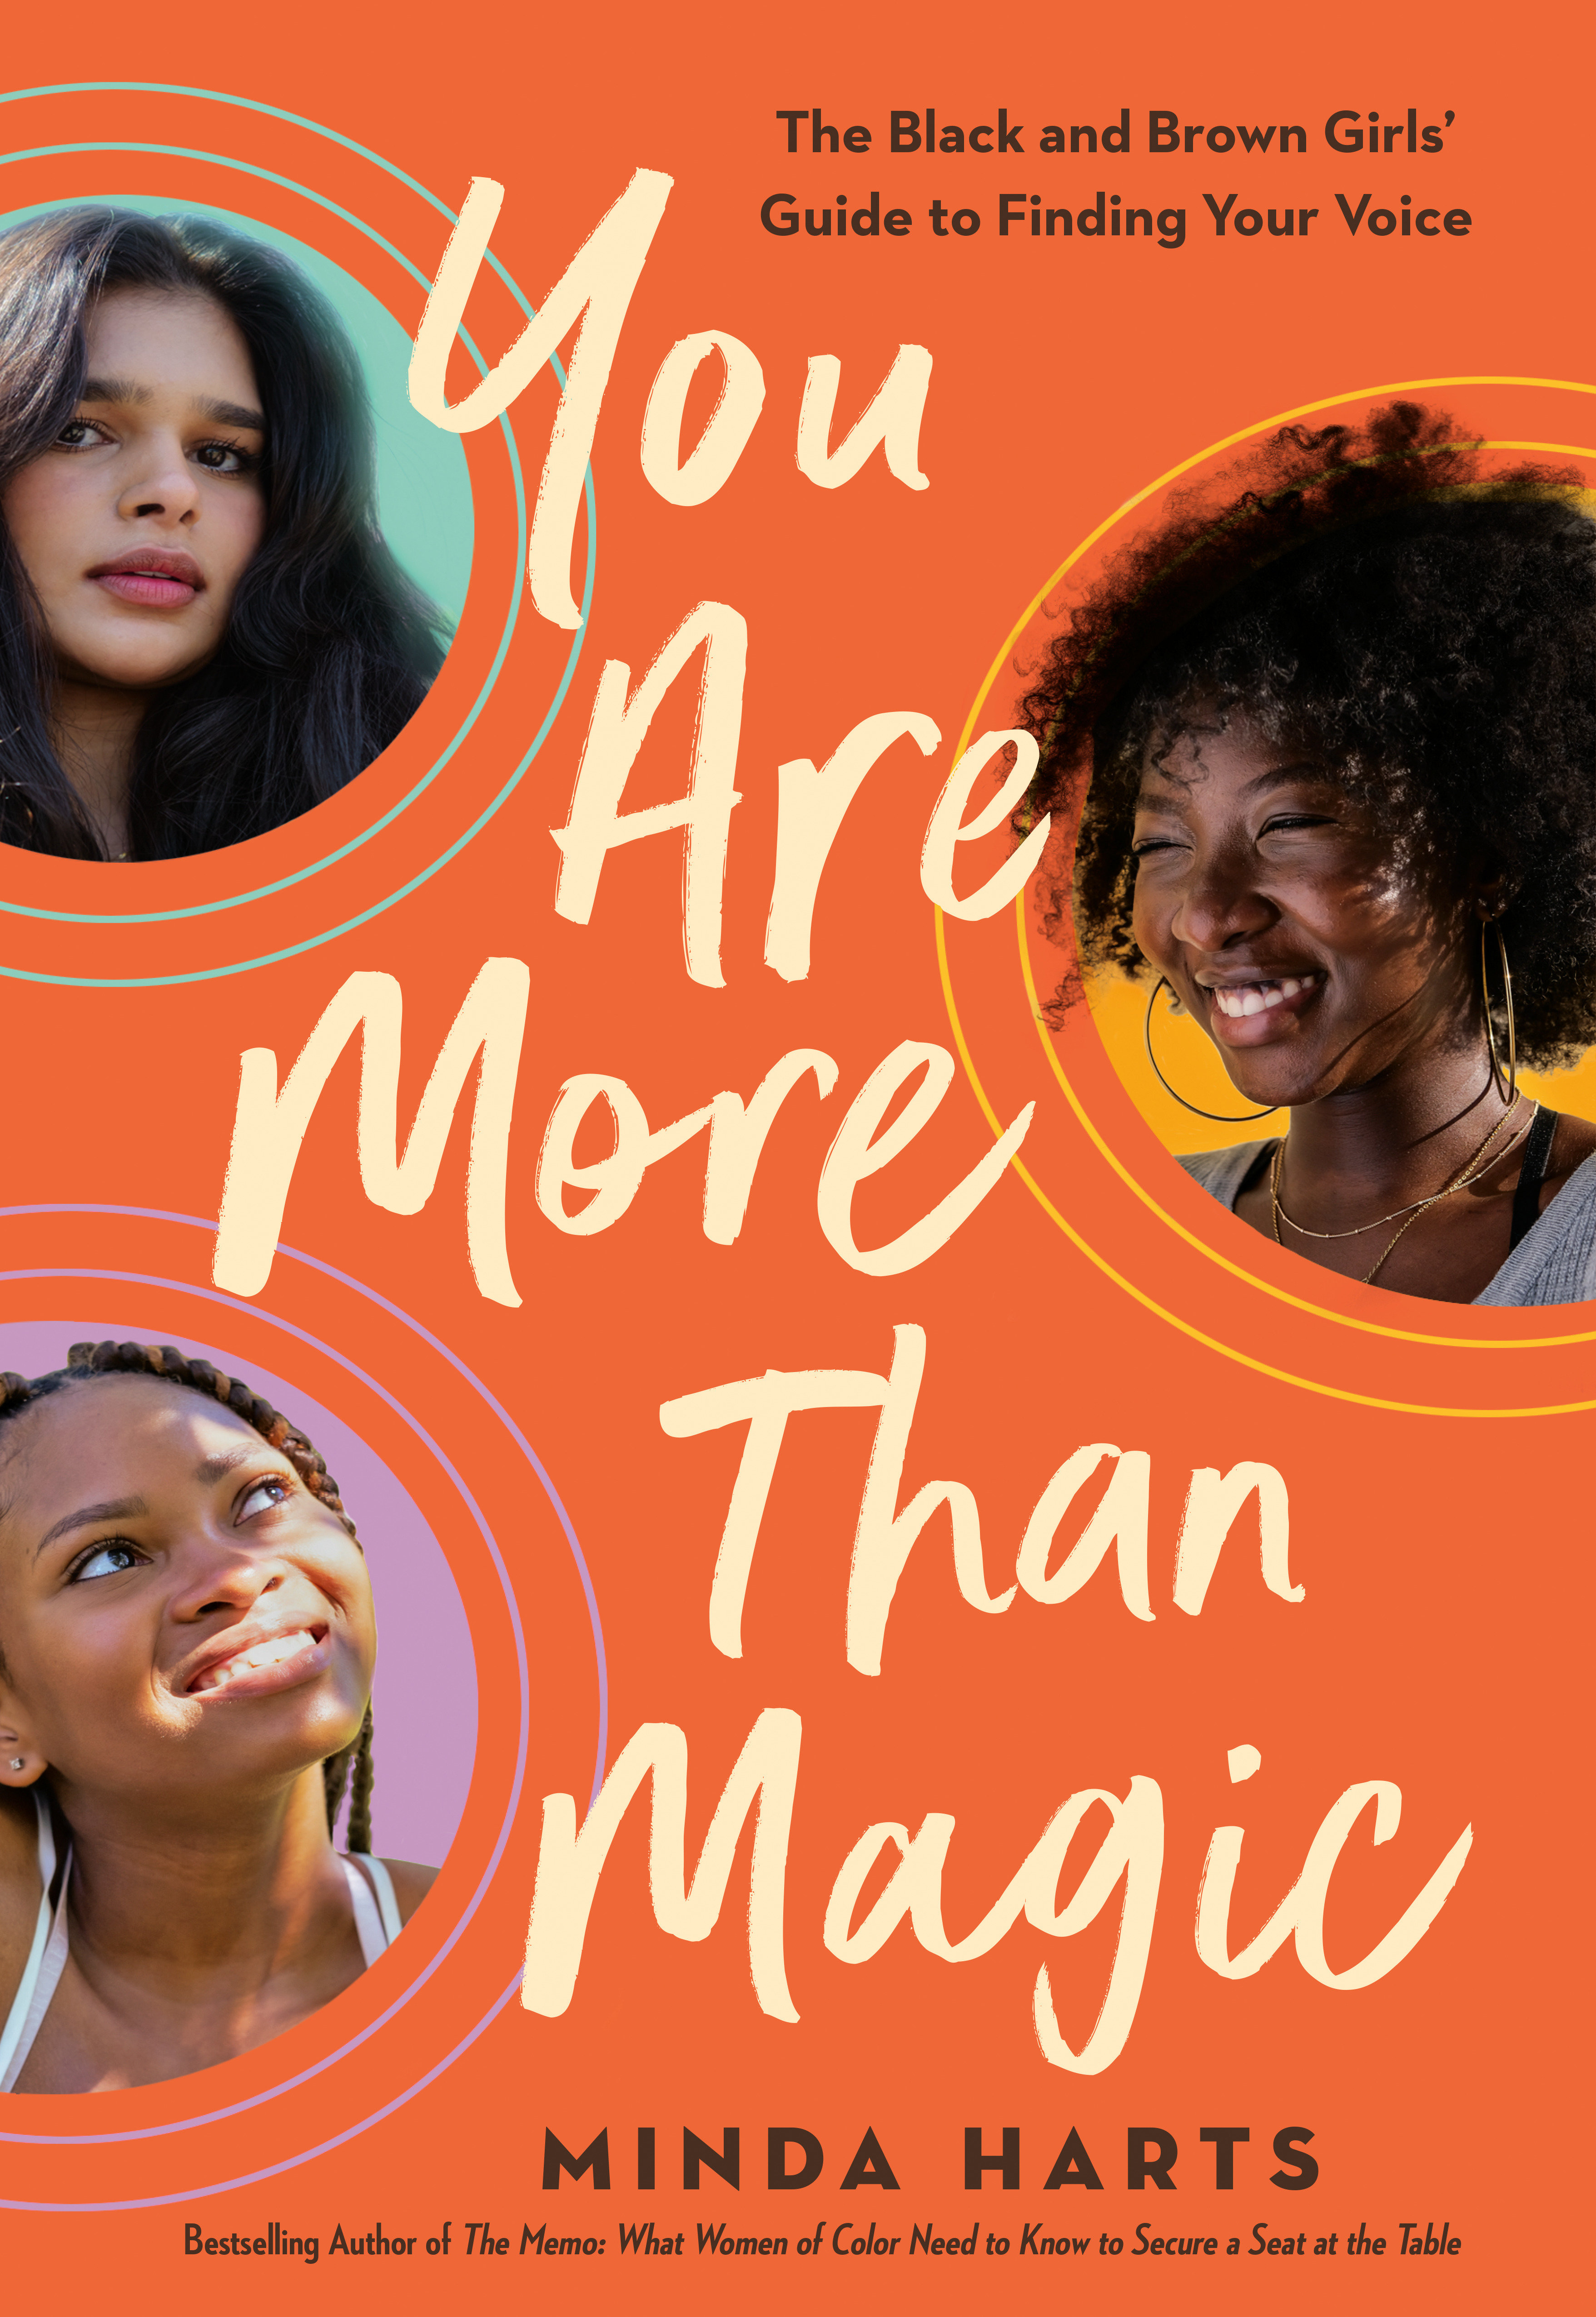 You Are More Than Magic (Hardcover Book)